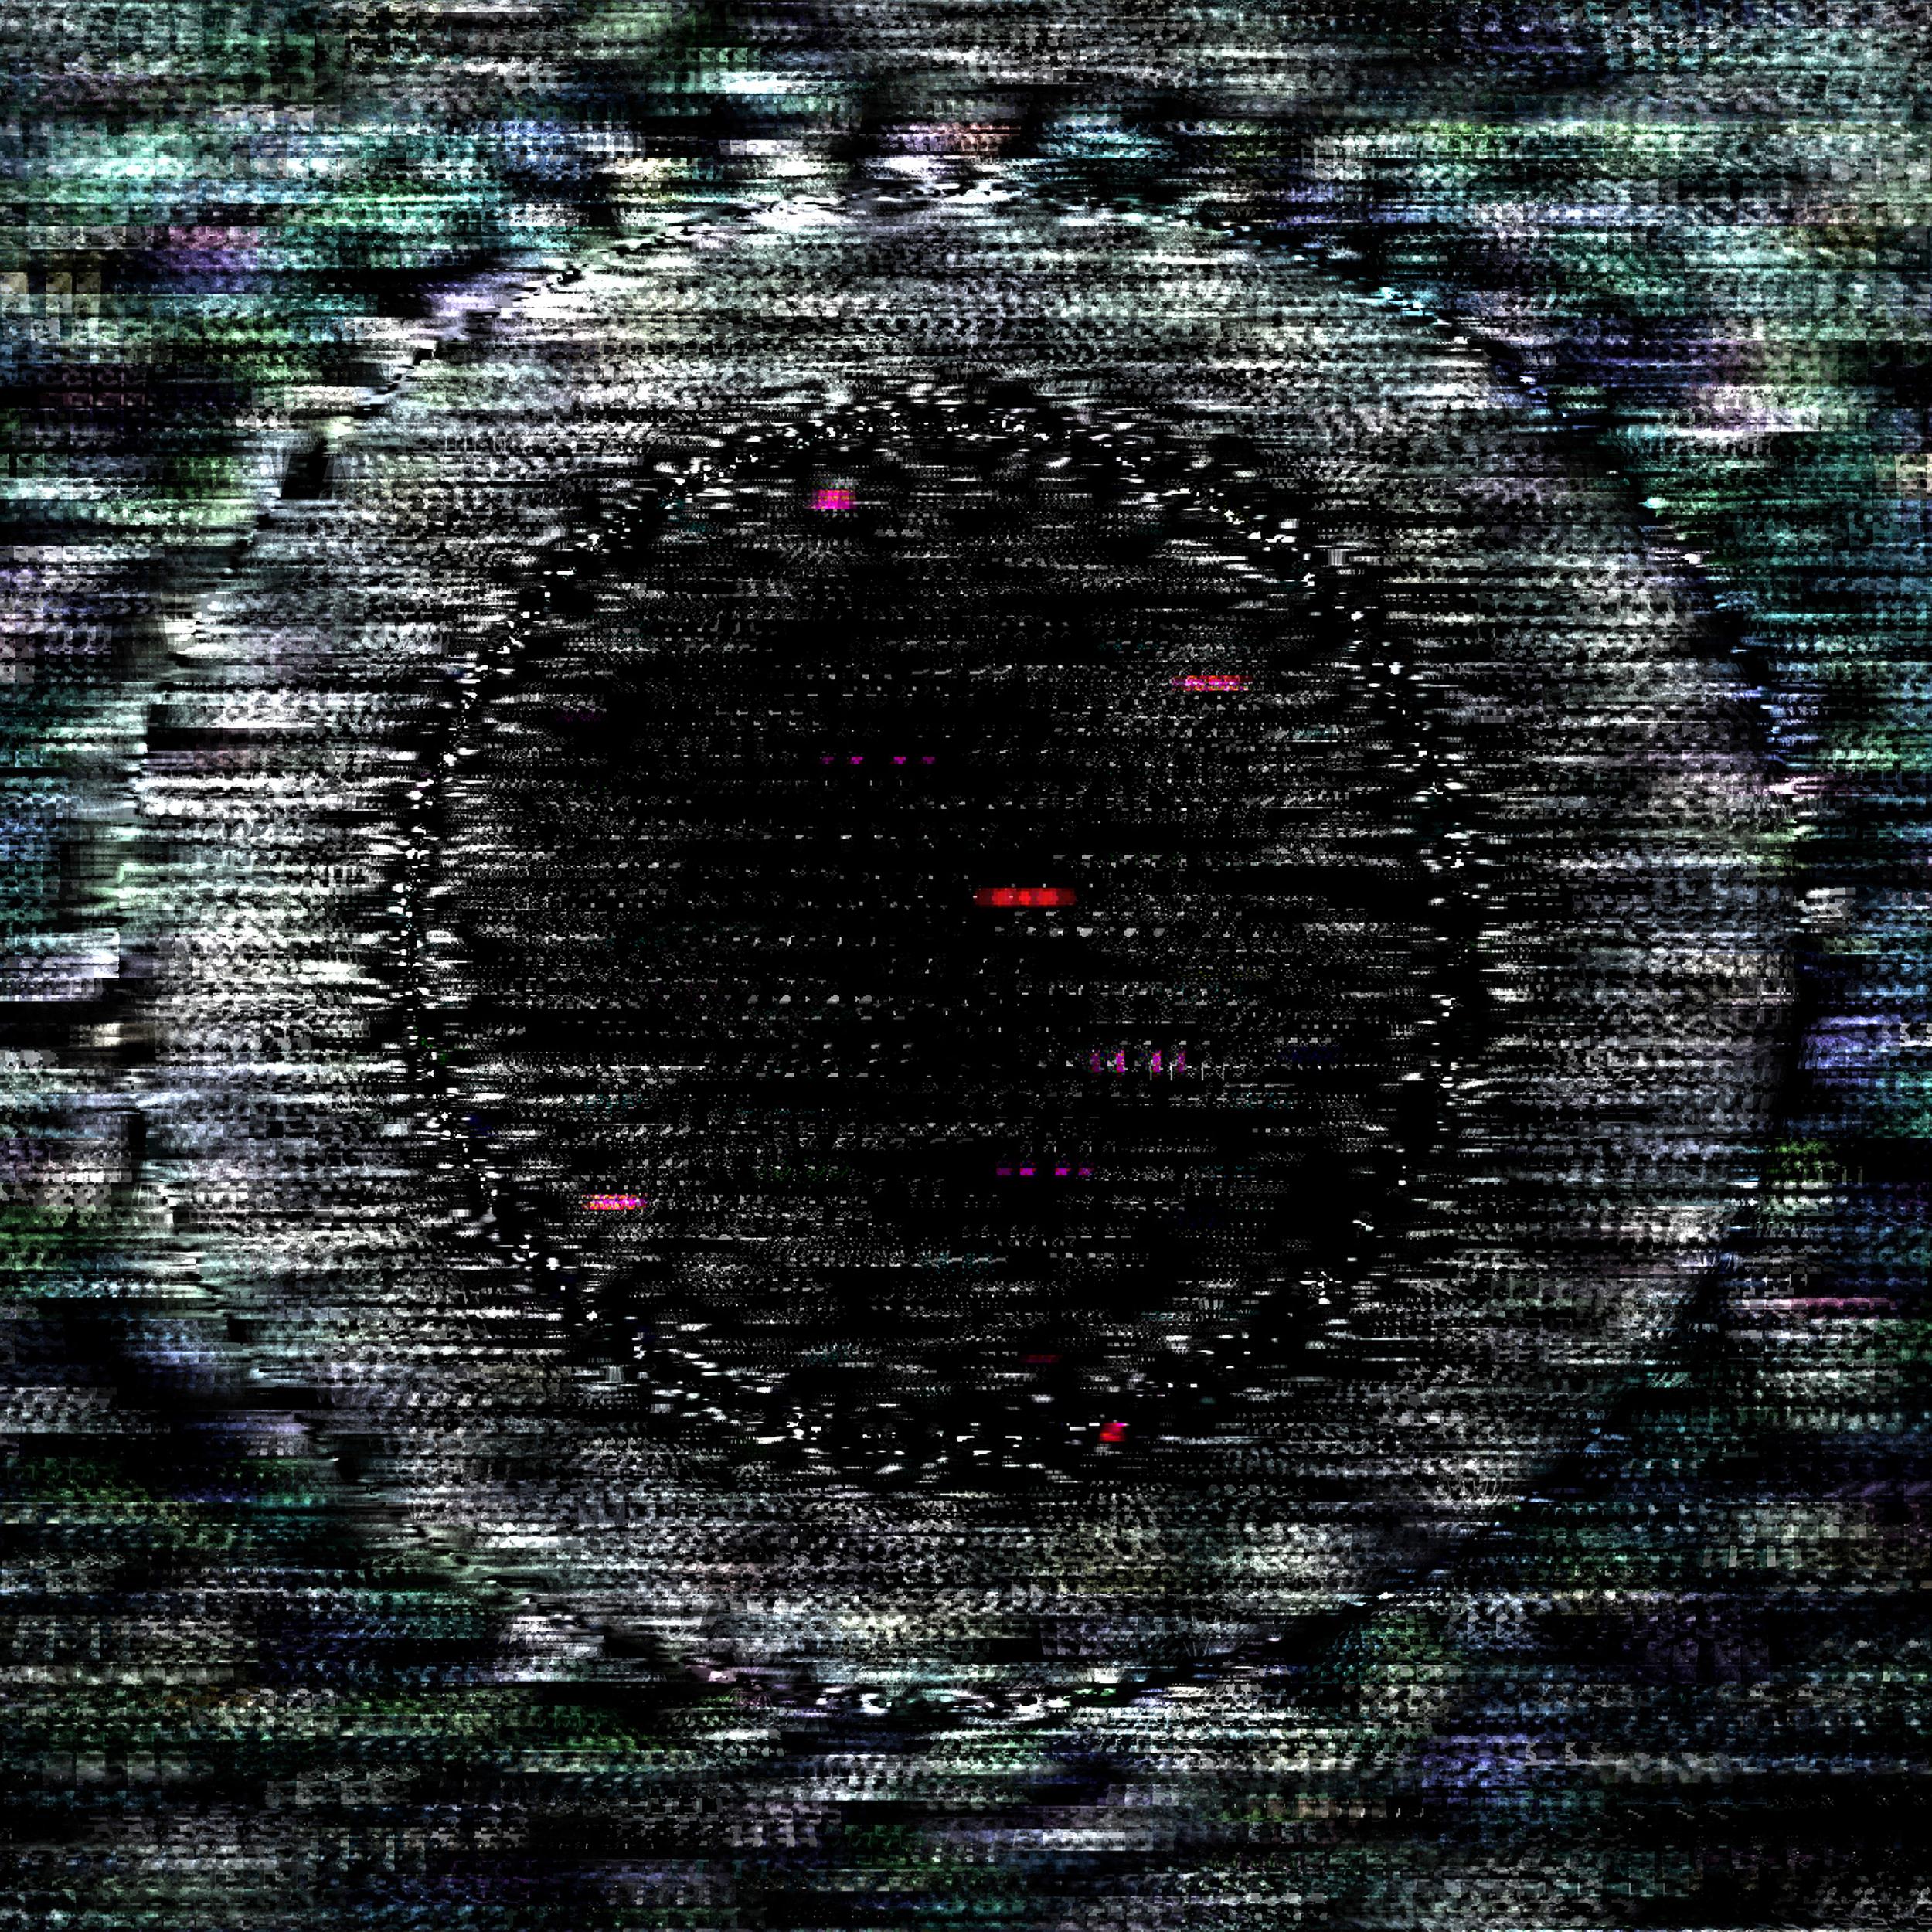 Noise #12 [Black, White, 3D, Lenticular, New media, Circle, Galaxy, Space]